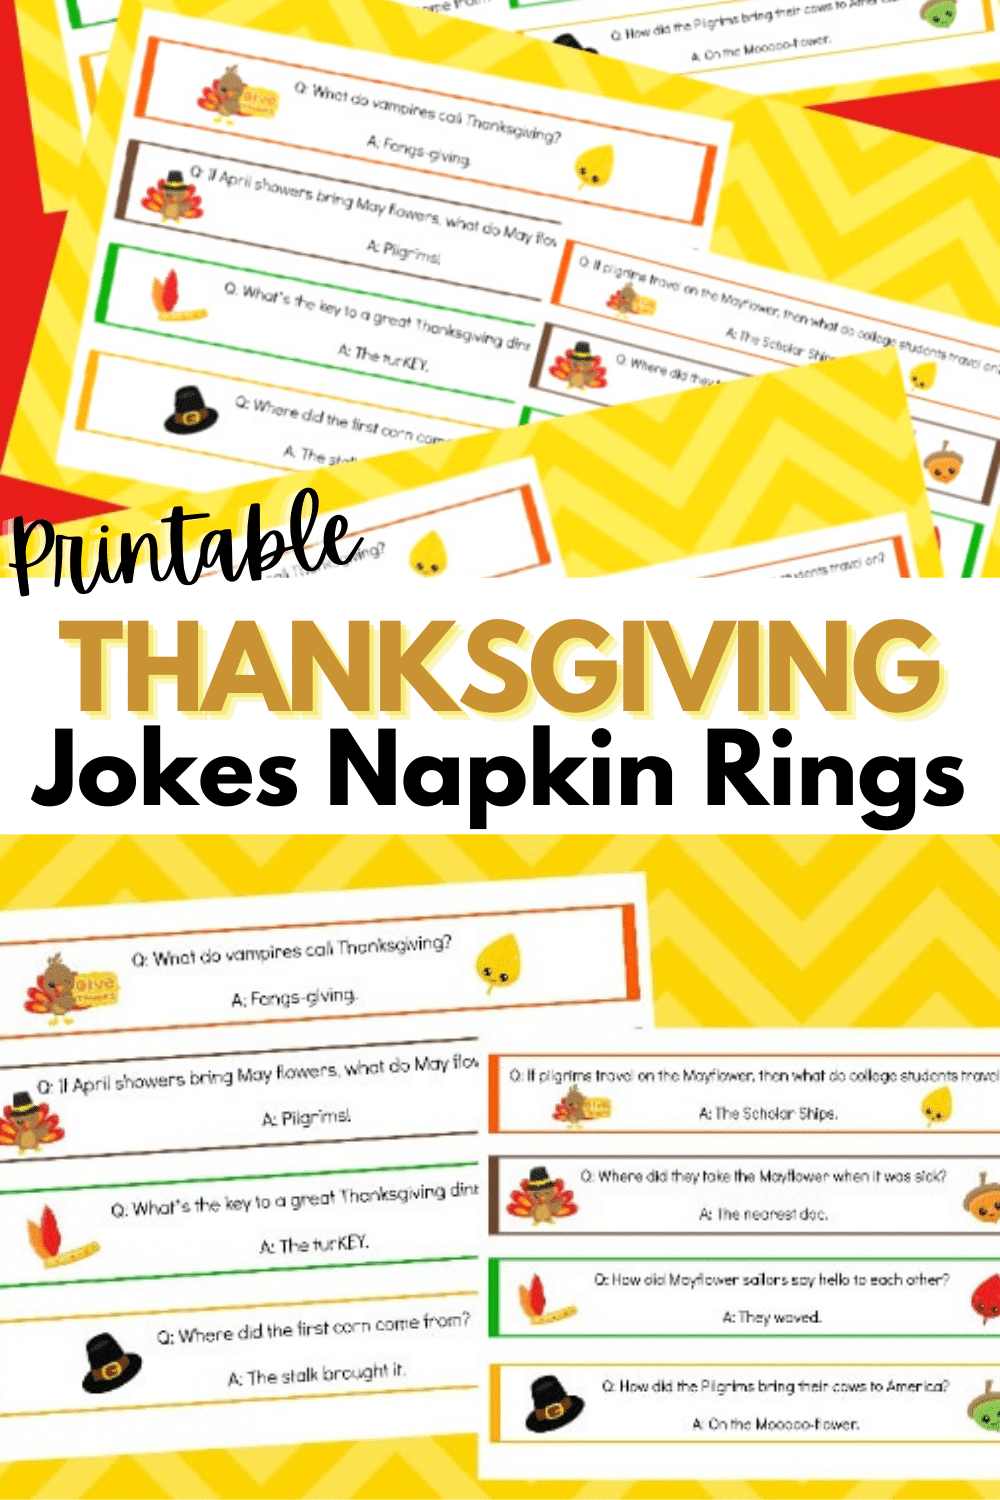 These printable Thanksgiving jokes napkin rings are an easy way to bring laughter and fun to your Thanksgiving table and kids will love to tell them! #thanksgiving #printables #Thanksgivingjokes via @wondermomwannab